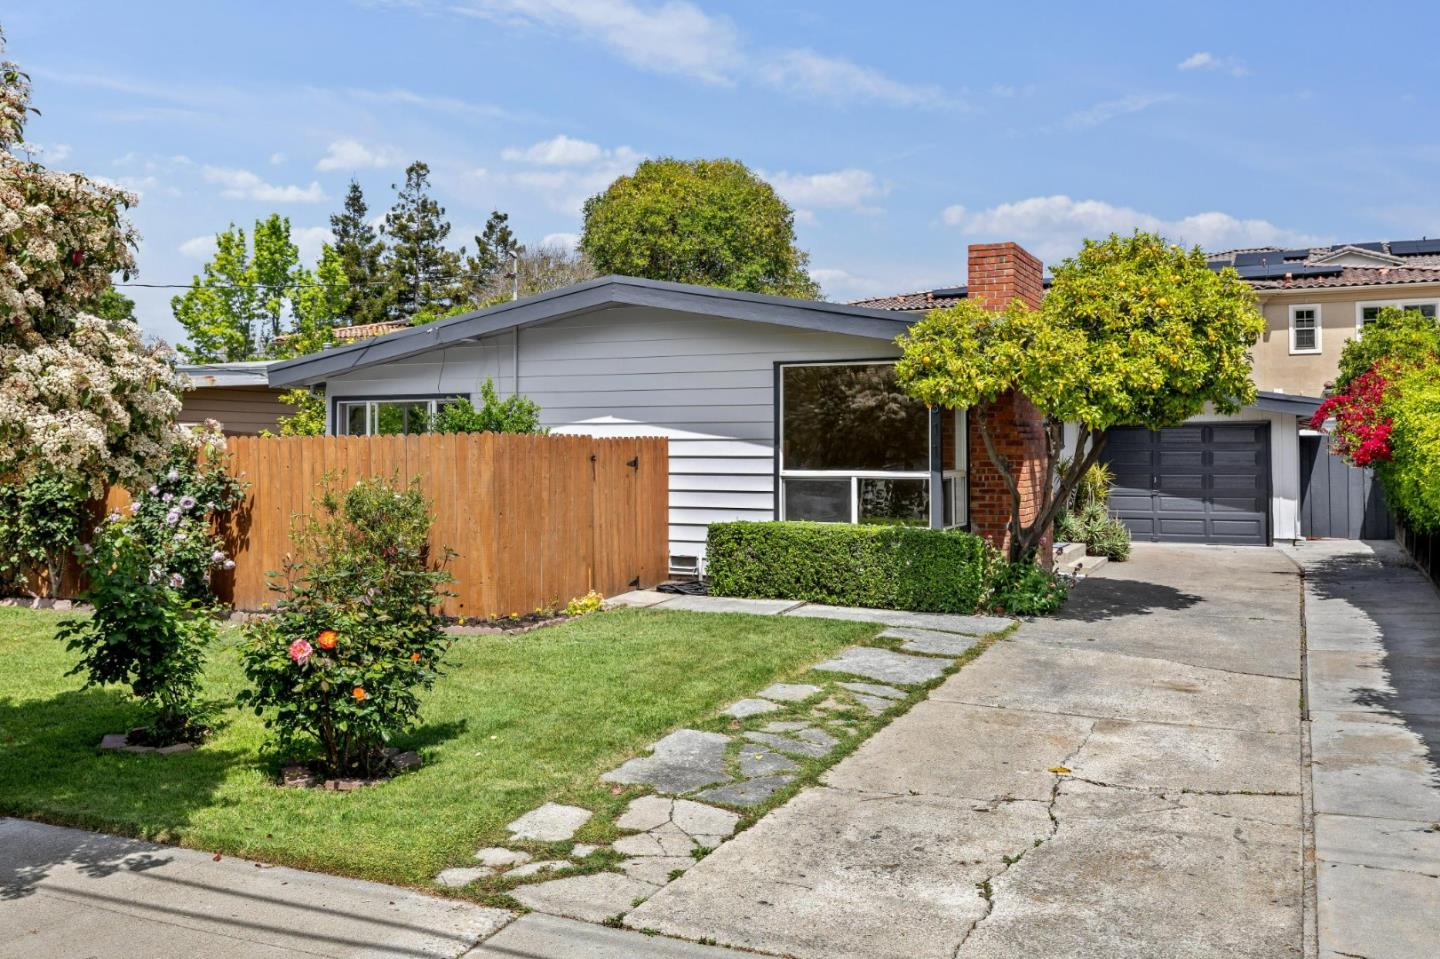 Photo of 311 W Eaglewood Ave in Sunnyvale, CA